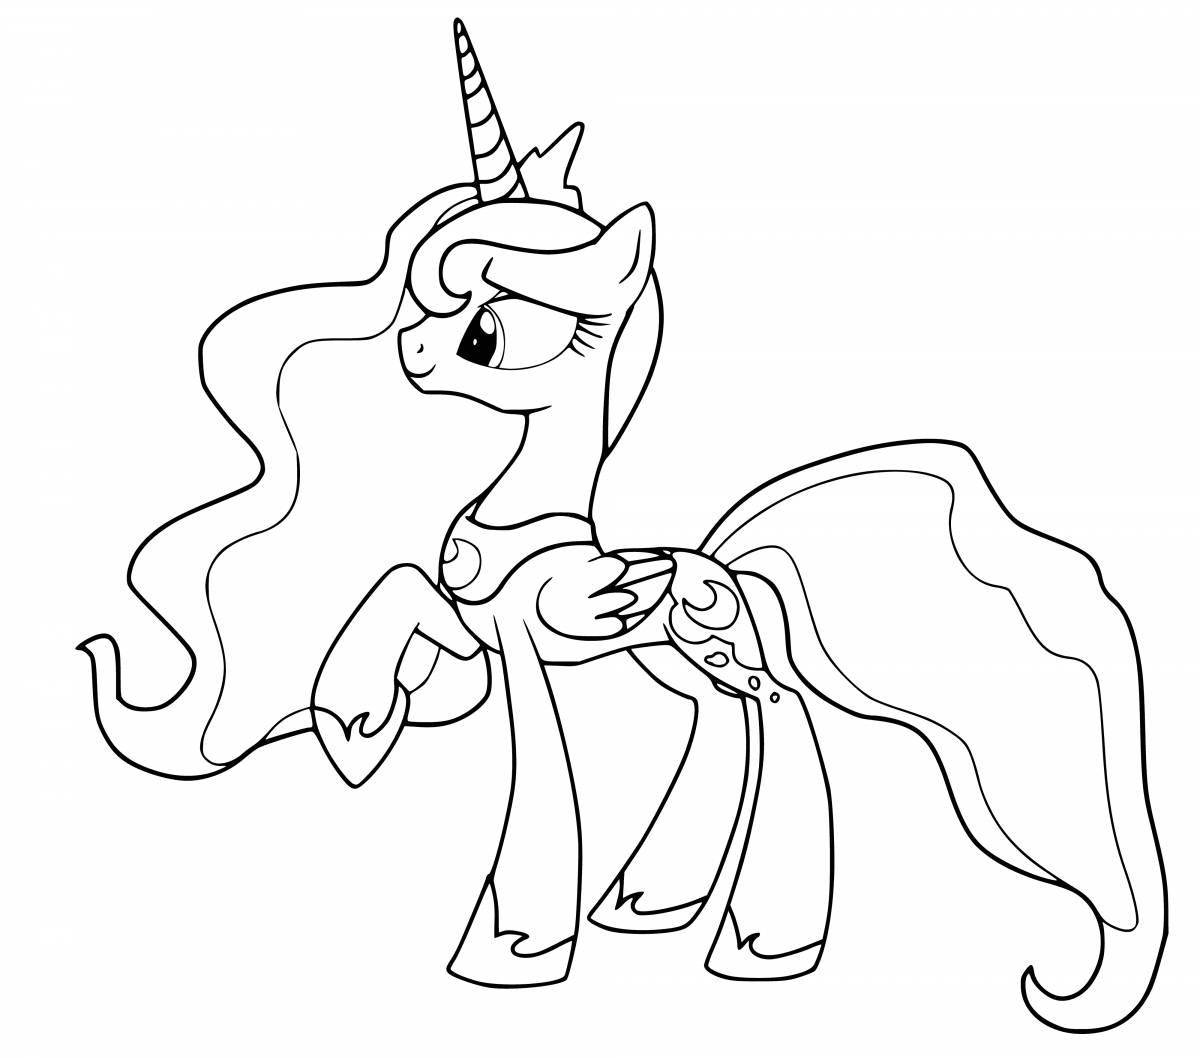 Moon pony majestic coloring book